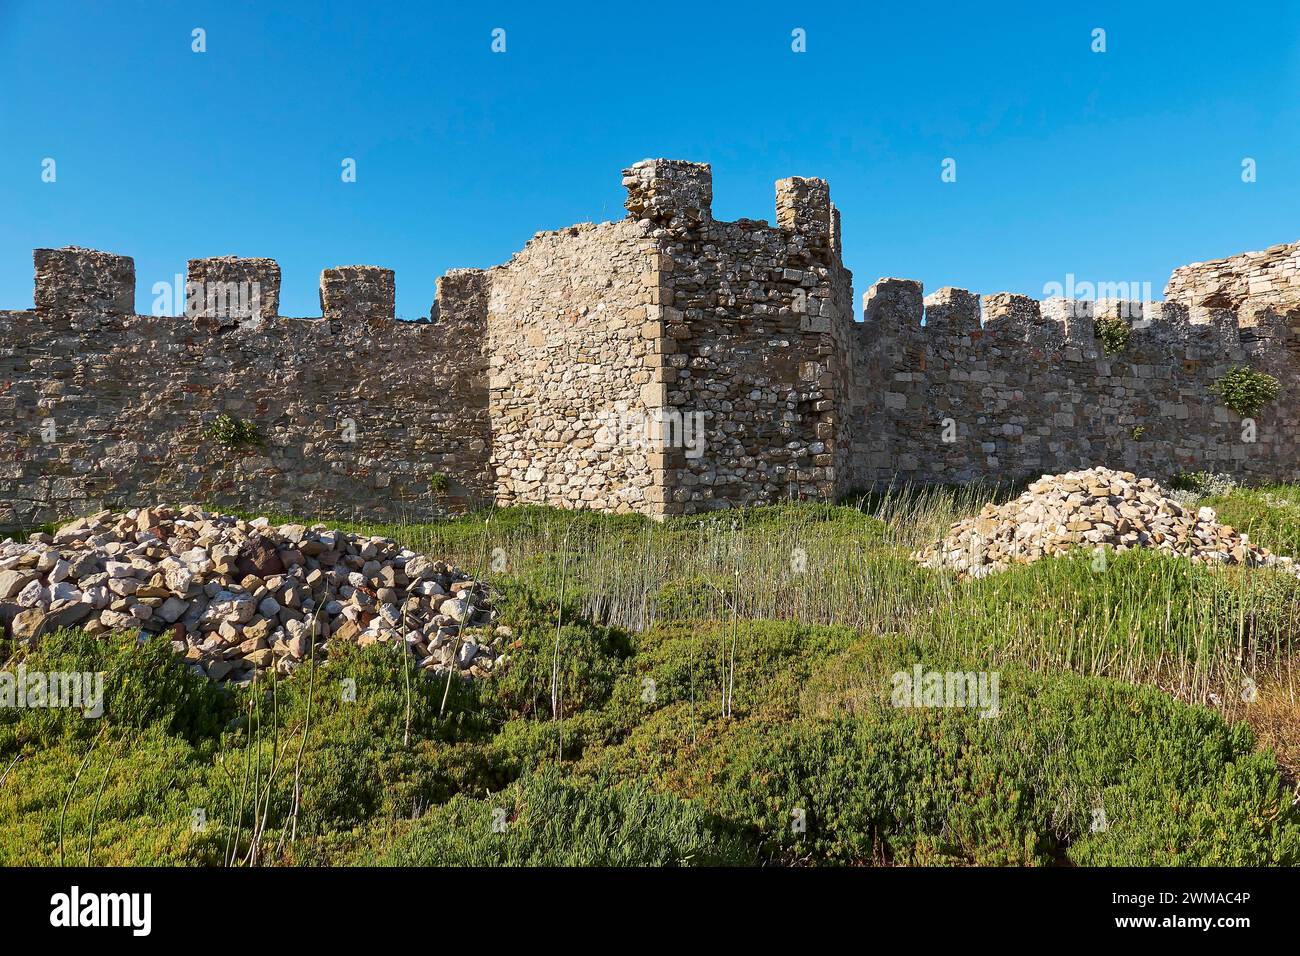 Wide angle shot of a towering castle wall surrounded by greenery with sky in the background, sea fortress Methoni, Peloponnese, Greece Stock Photo